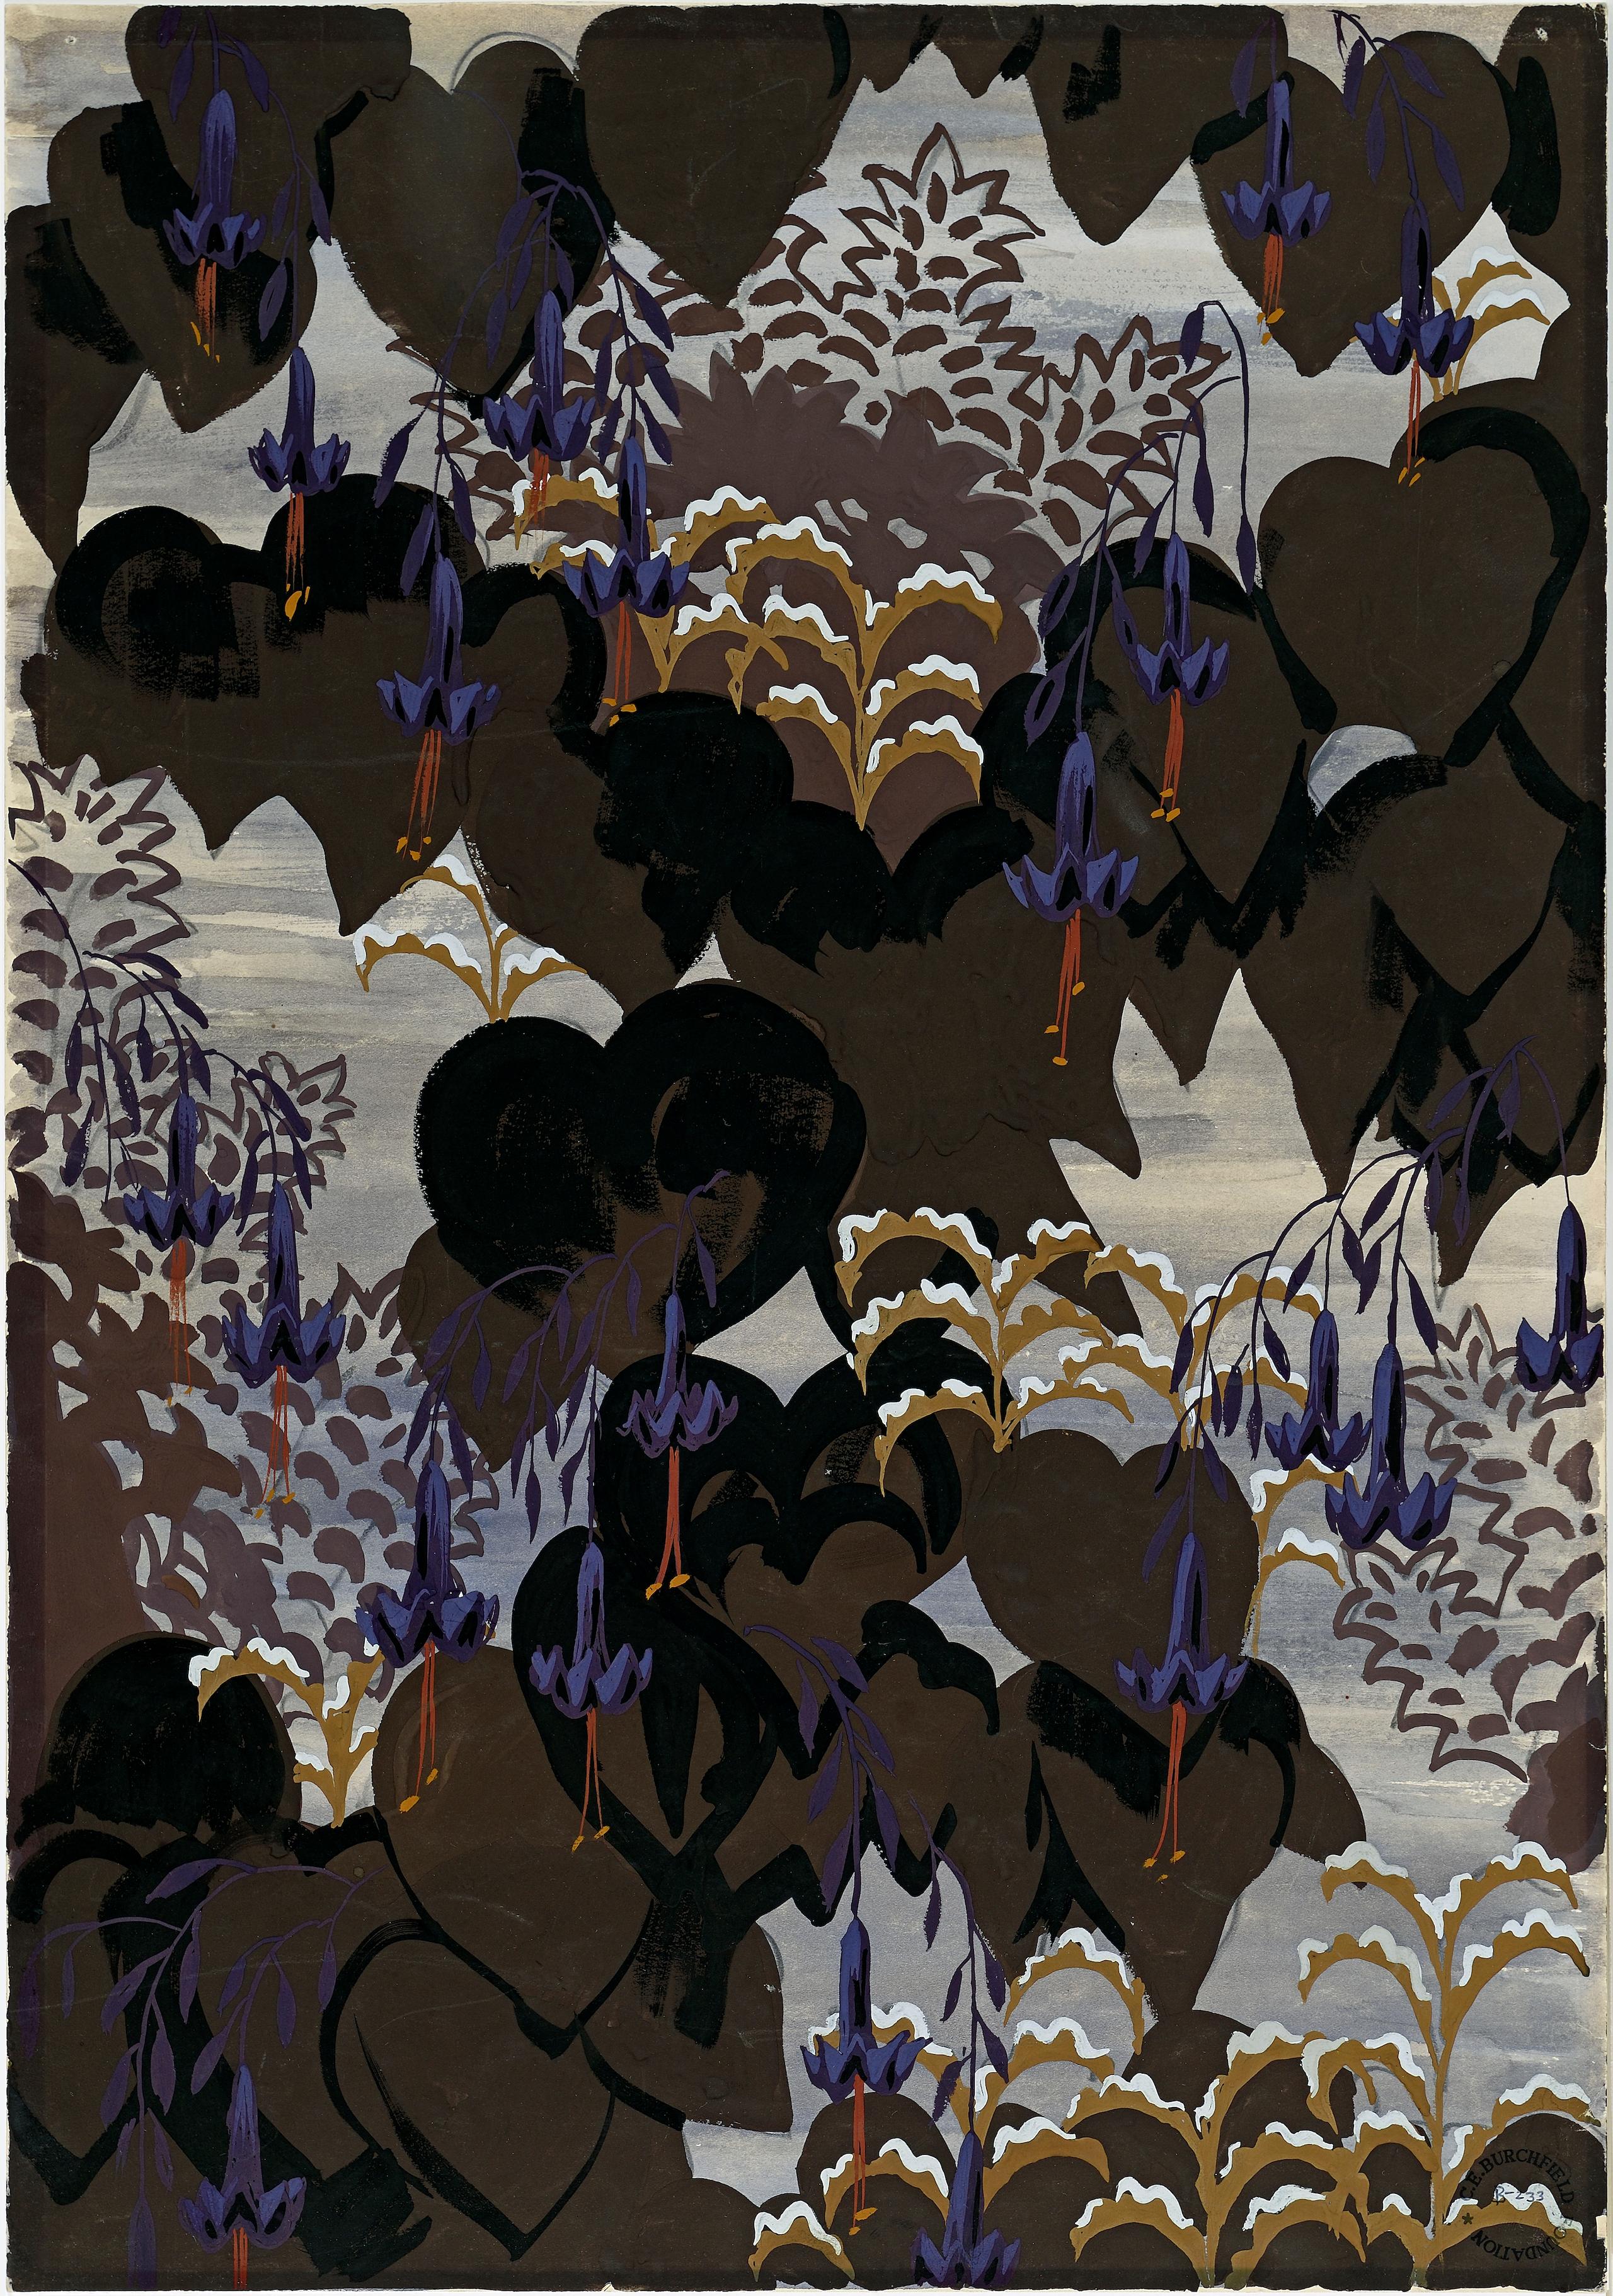 Charles Burchfield, 1893-1967
Wallpaper Design No.2, 1922-28
Watercolor and gouache on paper